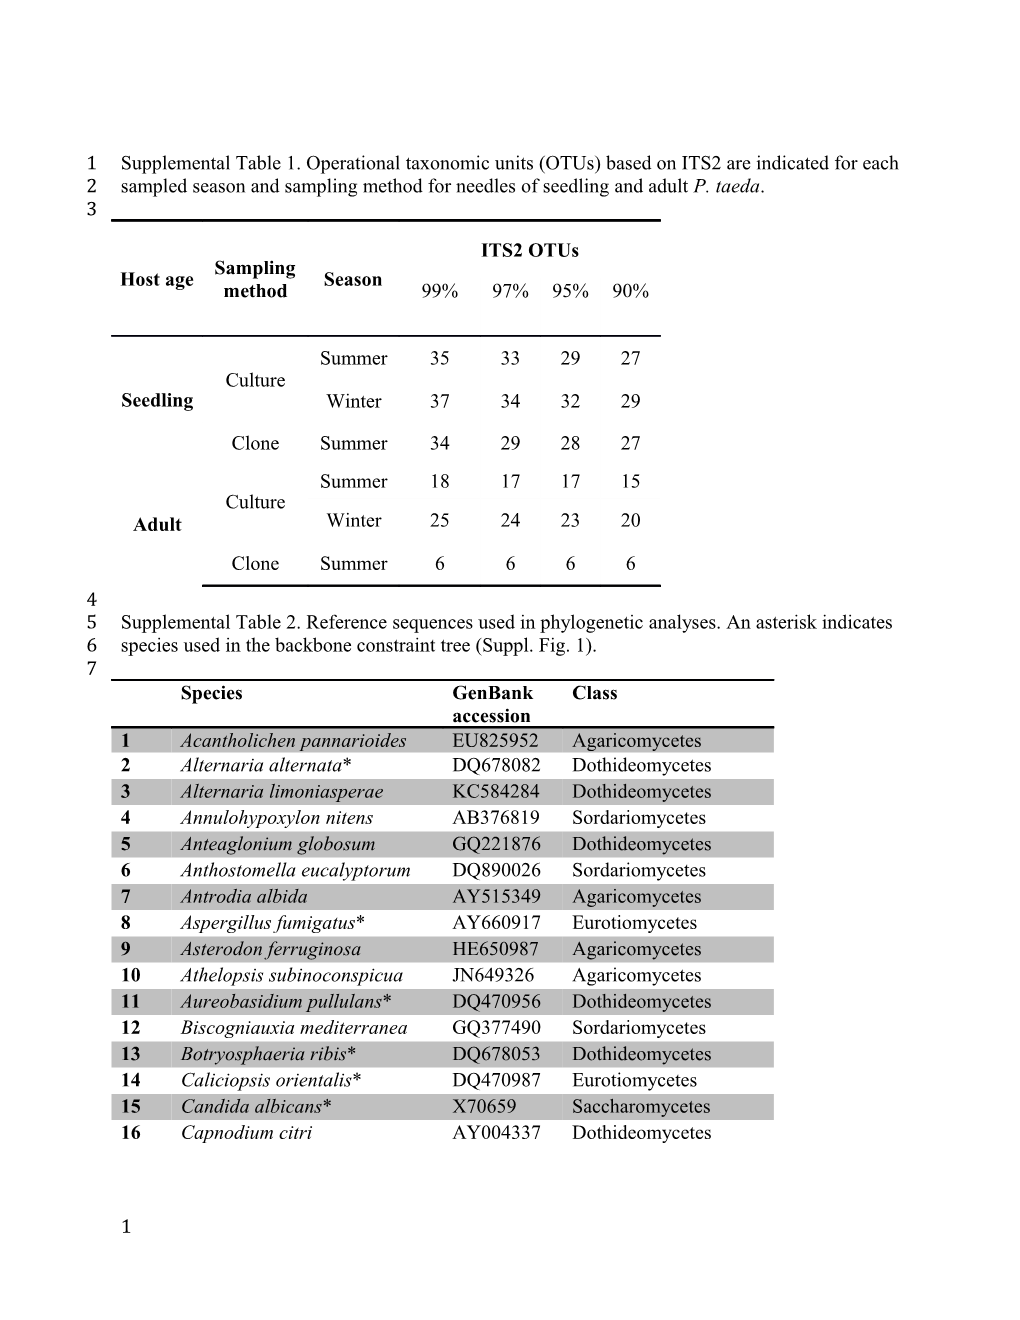 Supplemental Table 3. Reference Sequences from Arnold Et Al. (2007) Used in Our Phylogenetic